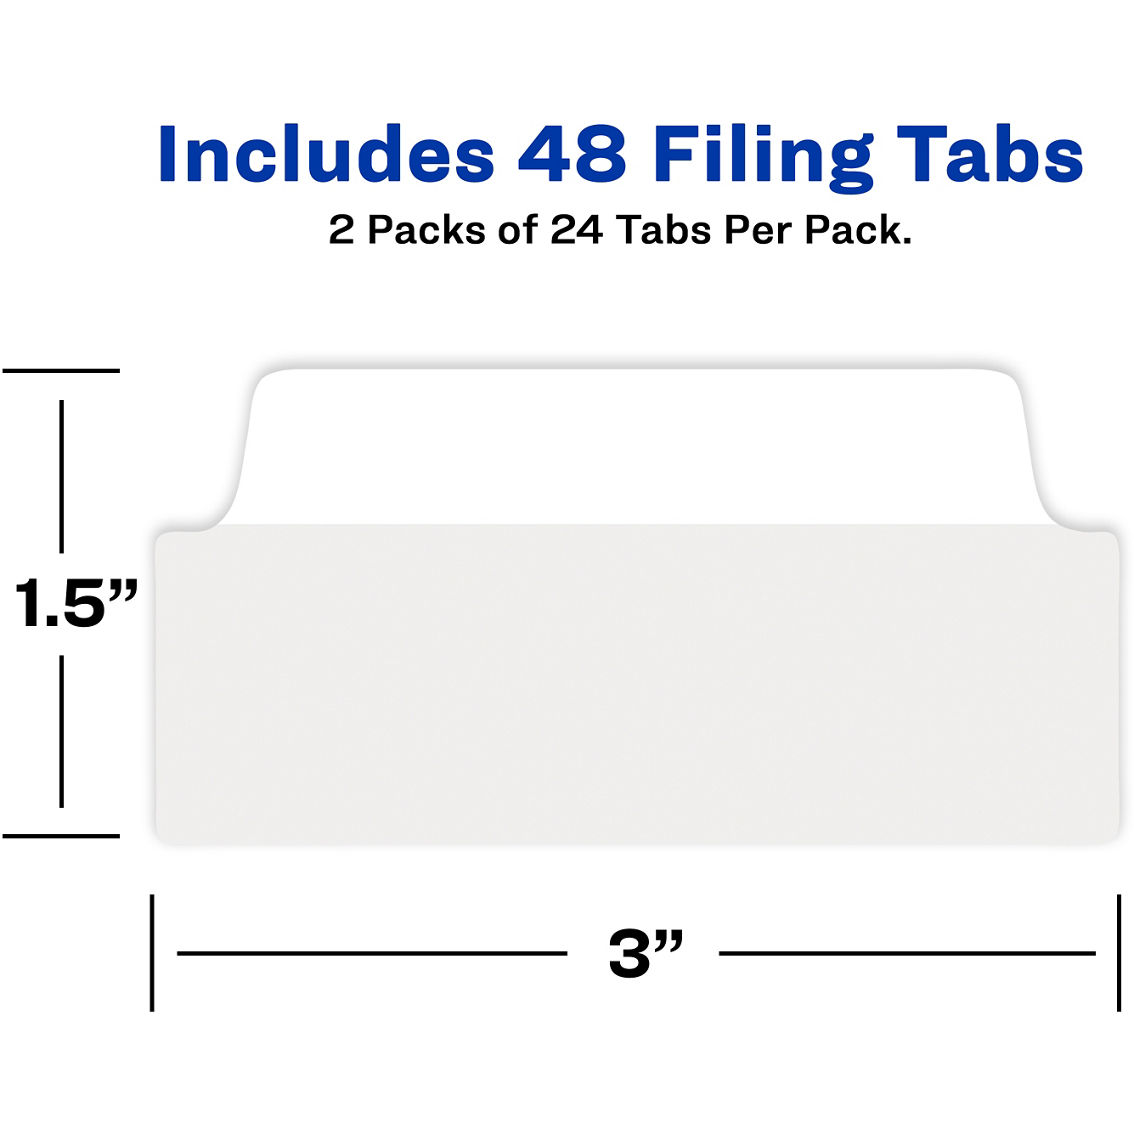 Avery White Filing Tabs Ultra-Tabs, 3 in. x 1.5 in., 24 ct. - Image 4 of 4